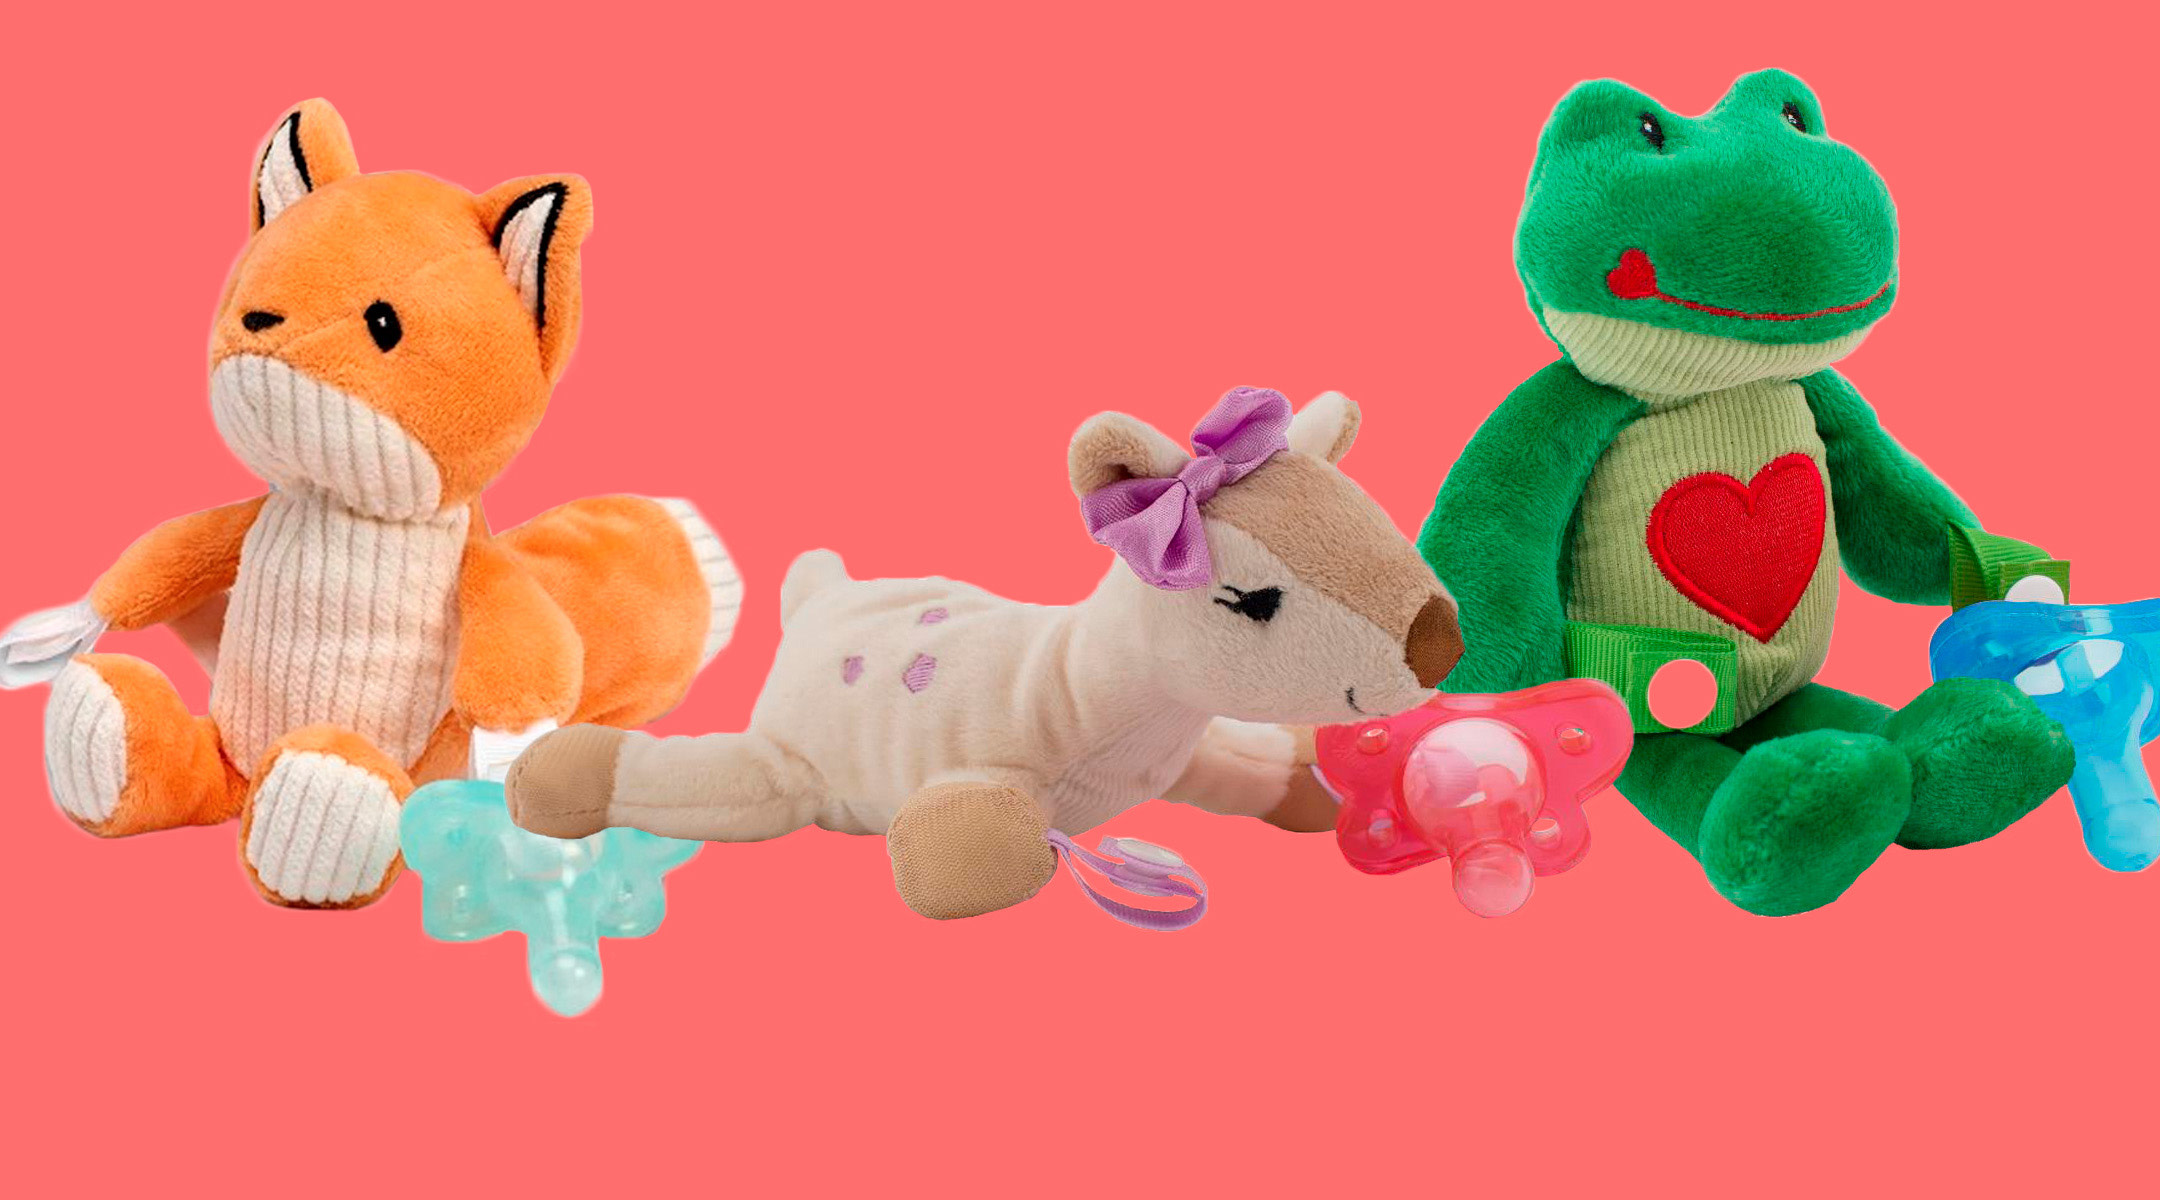 dr browns pacifier animals holders have been recalled